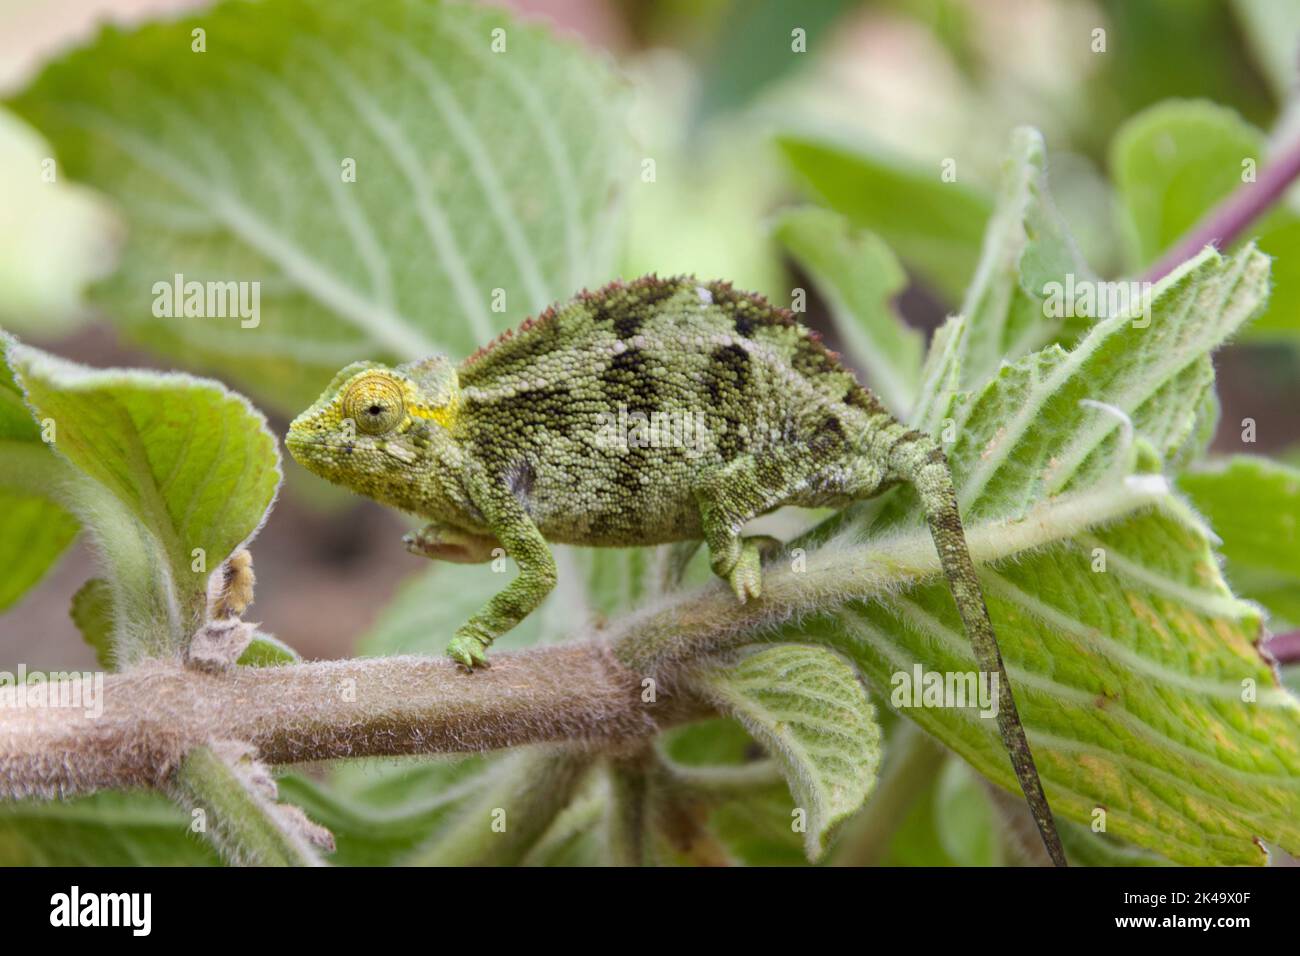 A green graceful chameleon on a branch in Uganda Stock Photo